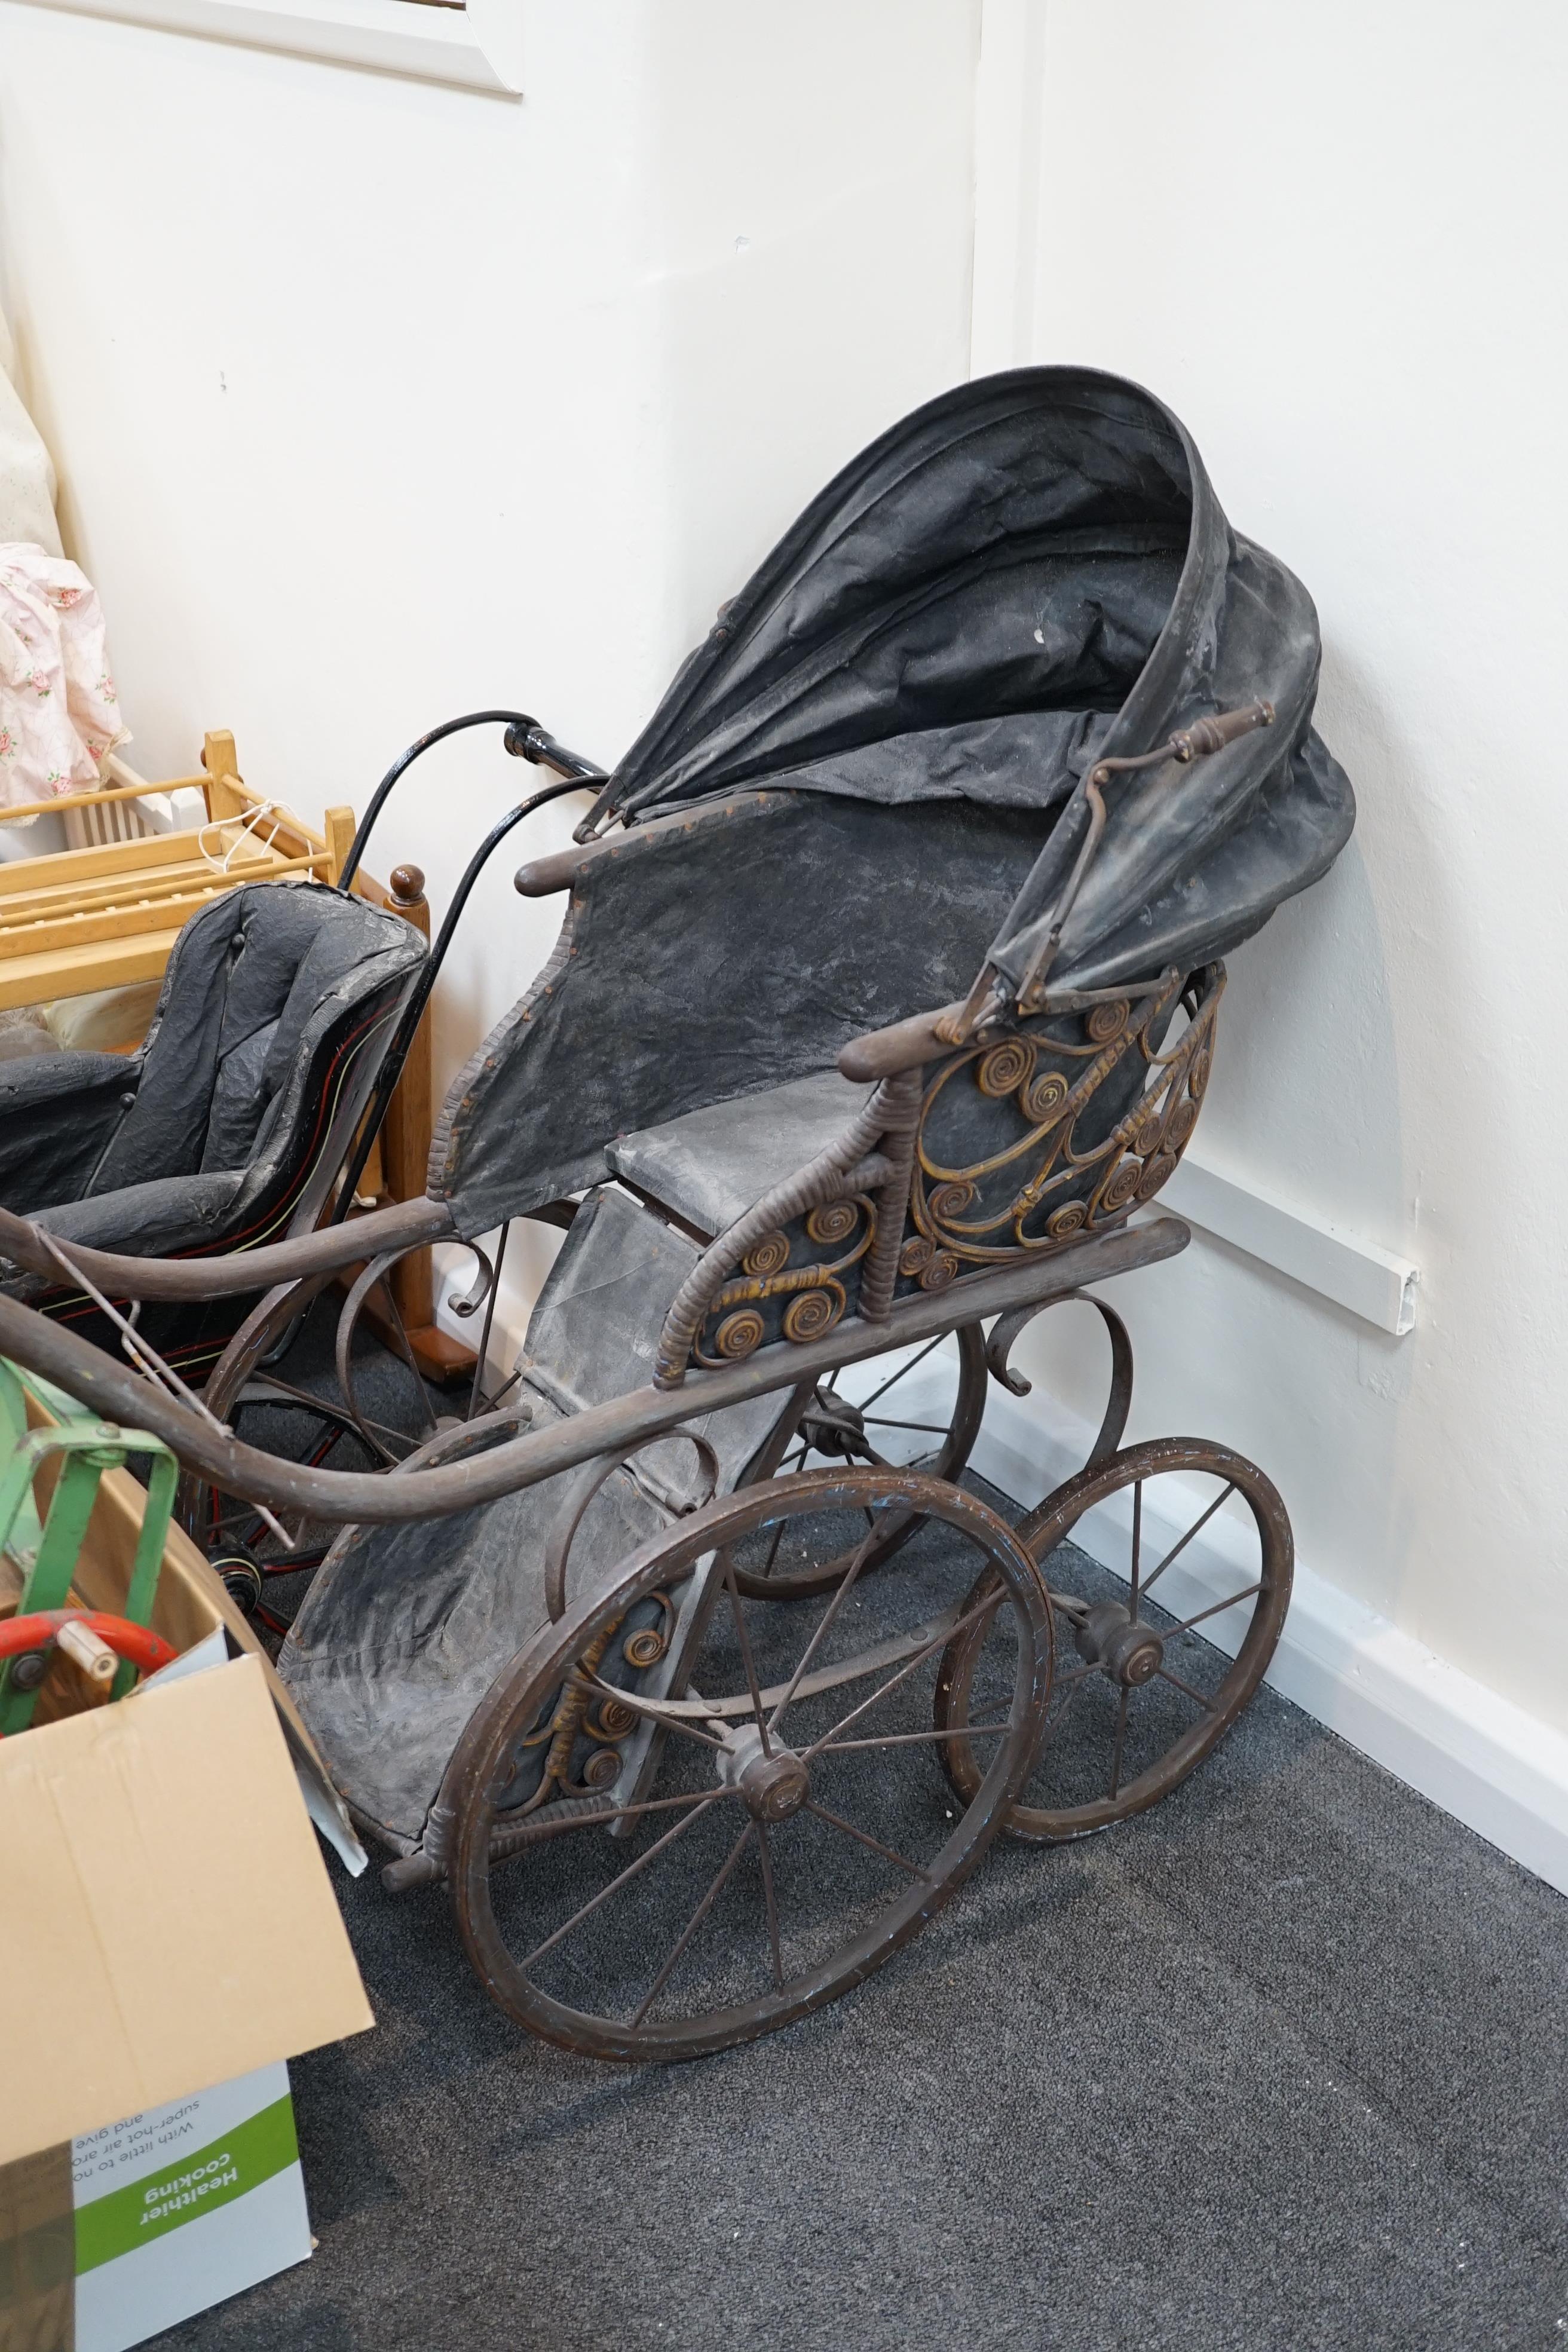 A collection of nine doll’s cribs of wood or wrought iron construction, together with two nineteenth century style doll’s ’bath chairs’, a toy mangle, Disney themed Snow White carpet sweeper and a boxed child’s sewing ma